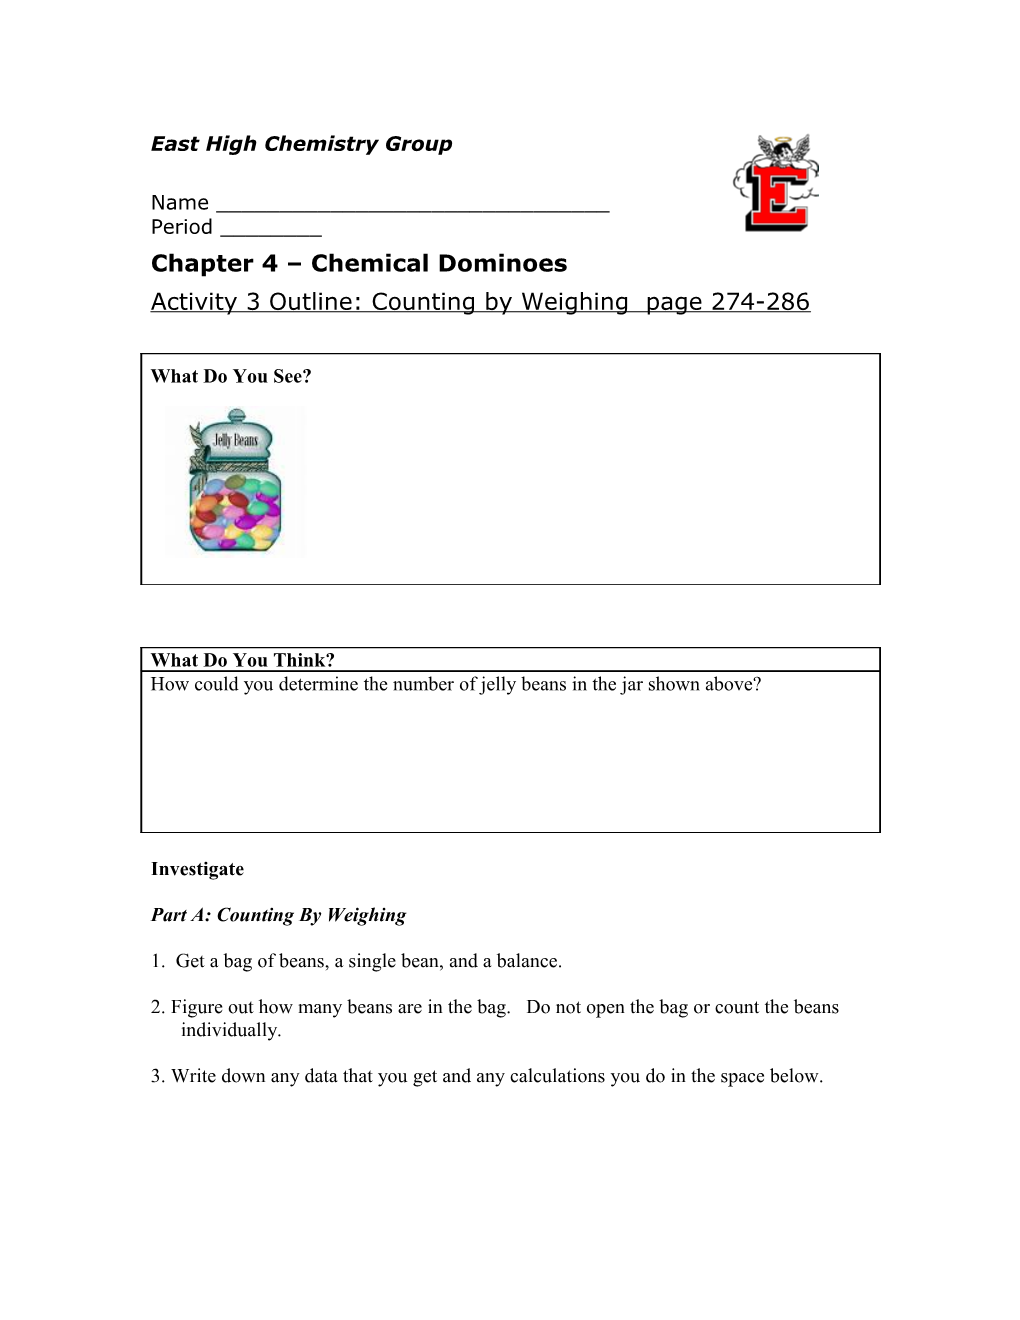 Chemical Dominoes Activity 3